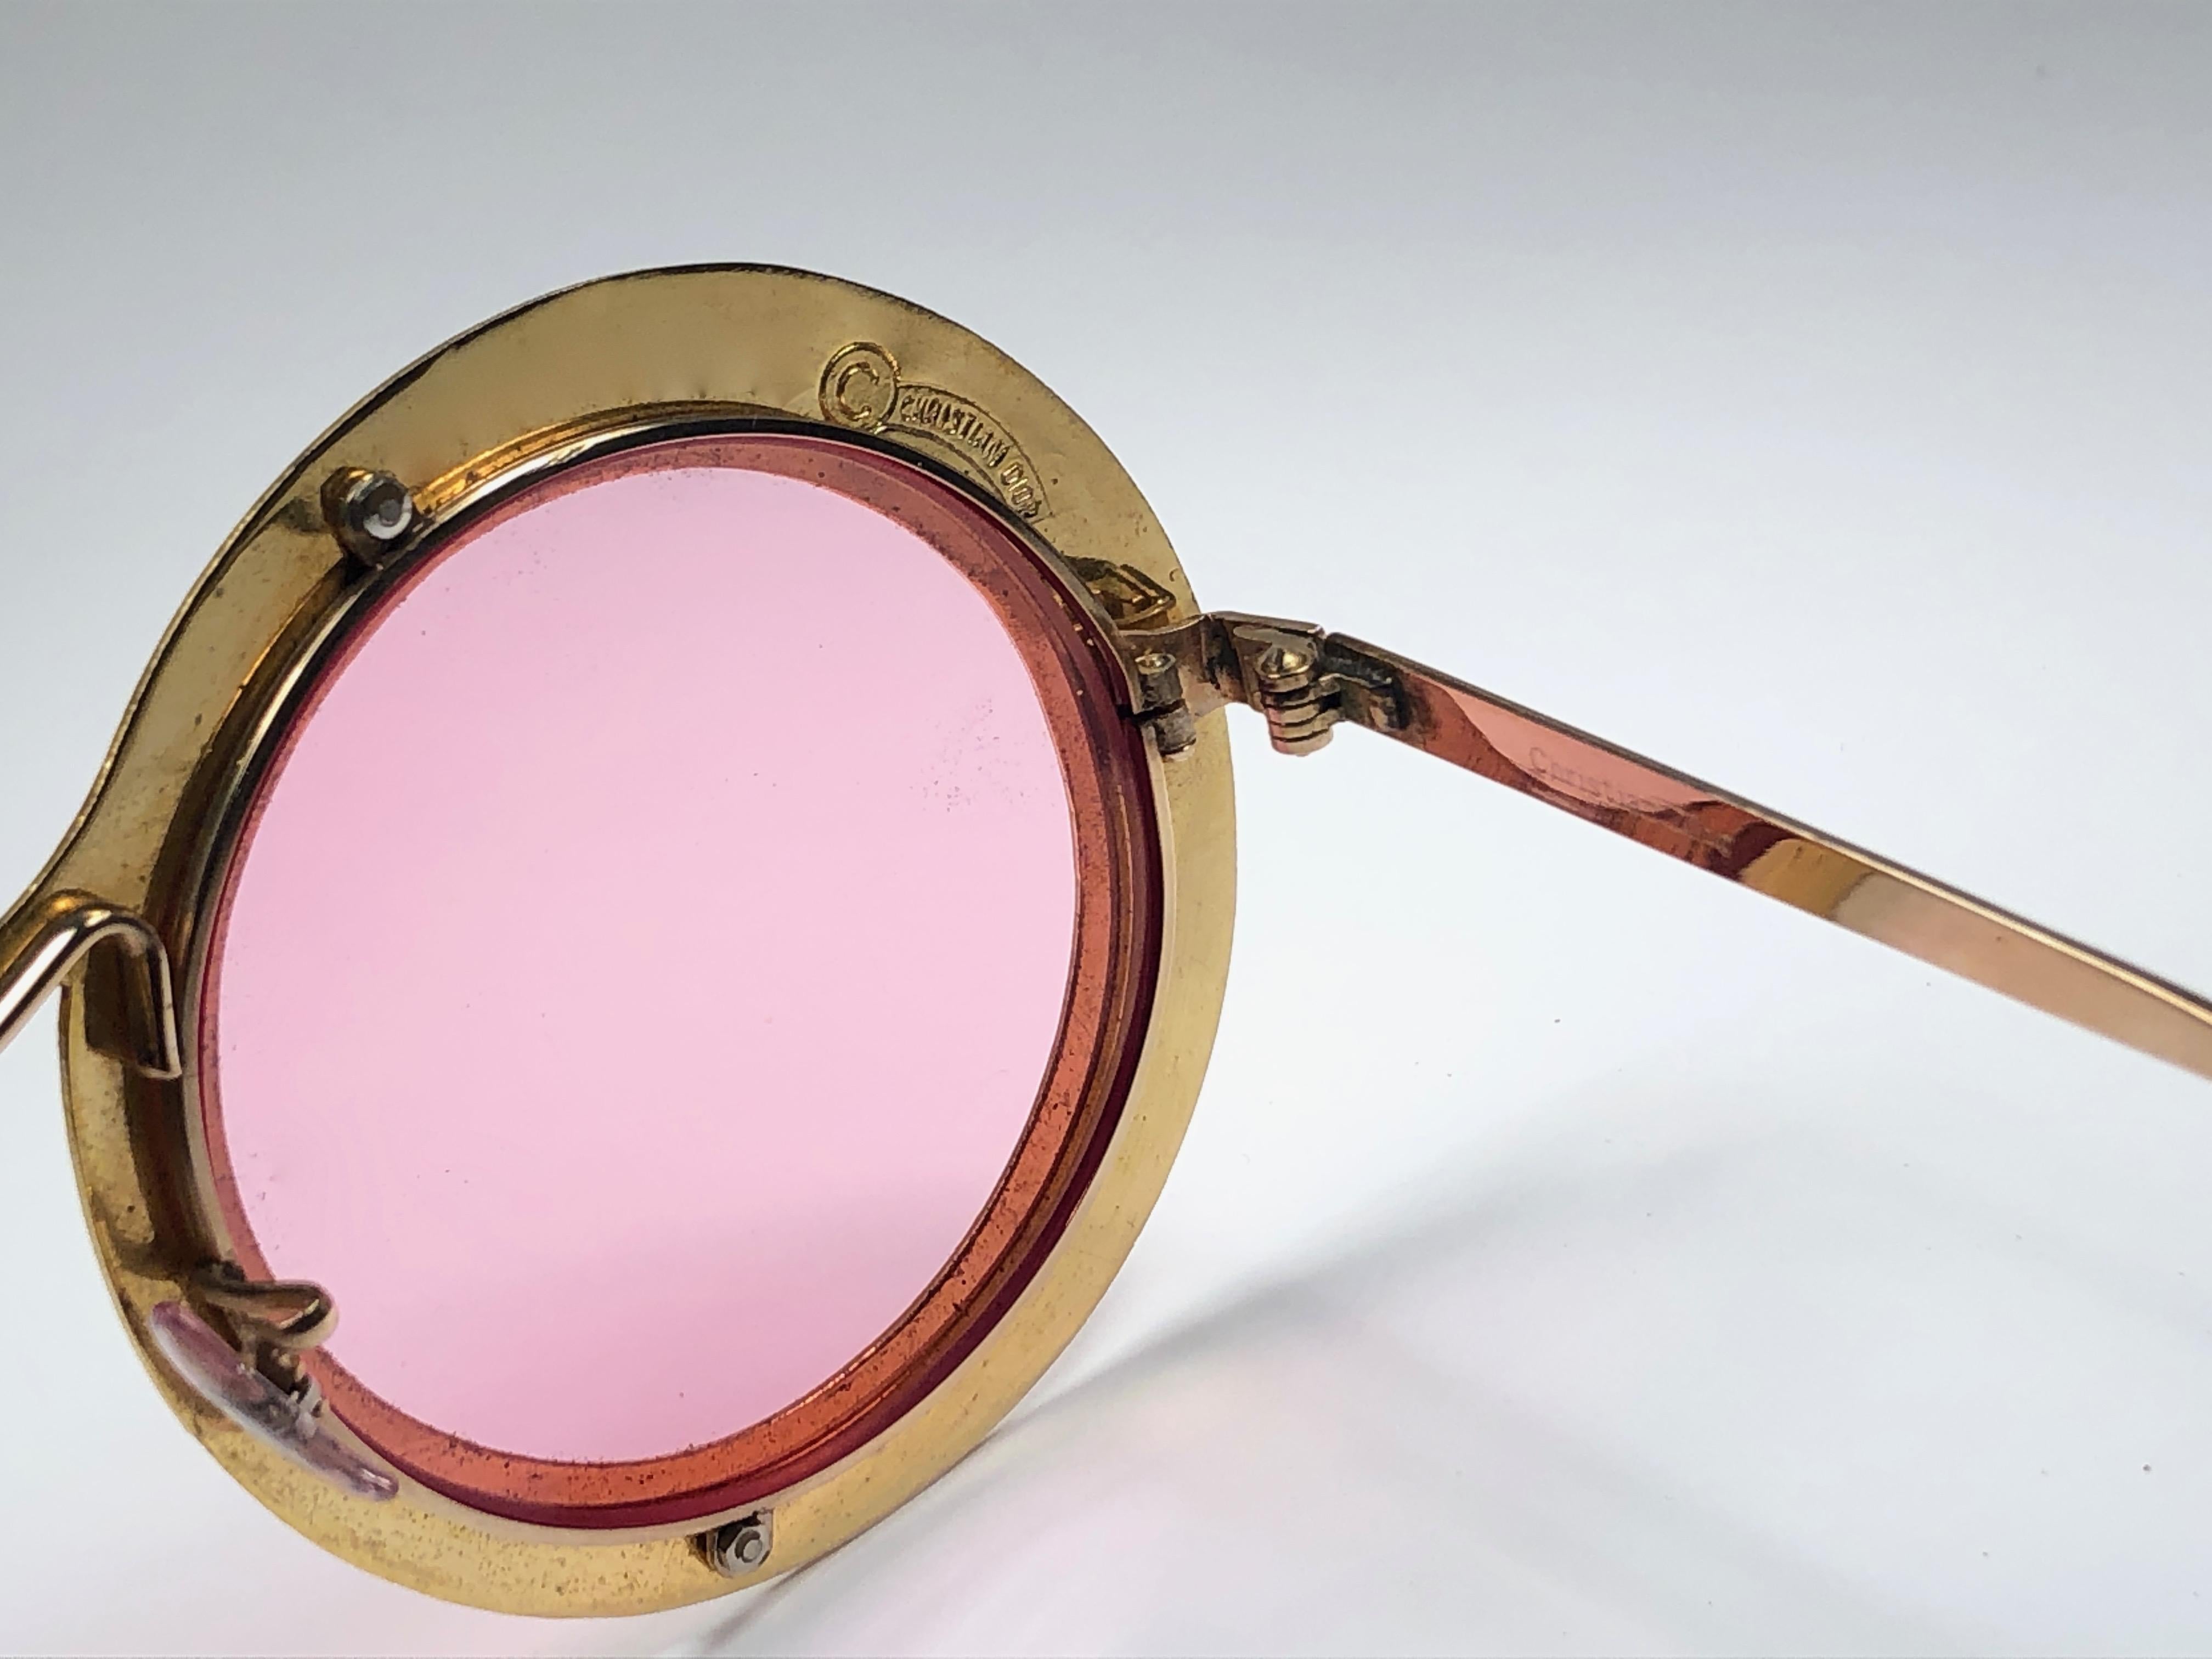 Ultra Rare Christian Dior Gypsy Rose Enamel Oversized Sunglasses, 1969  In Excellent Condition For Sale In Baleares, Baleares